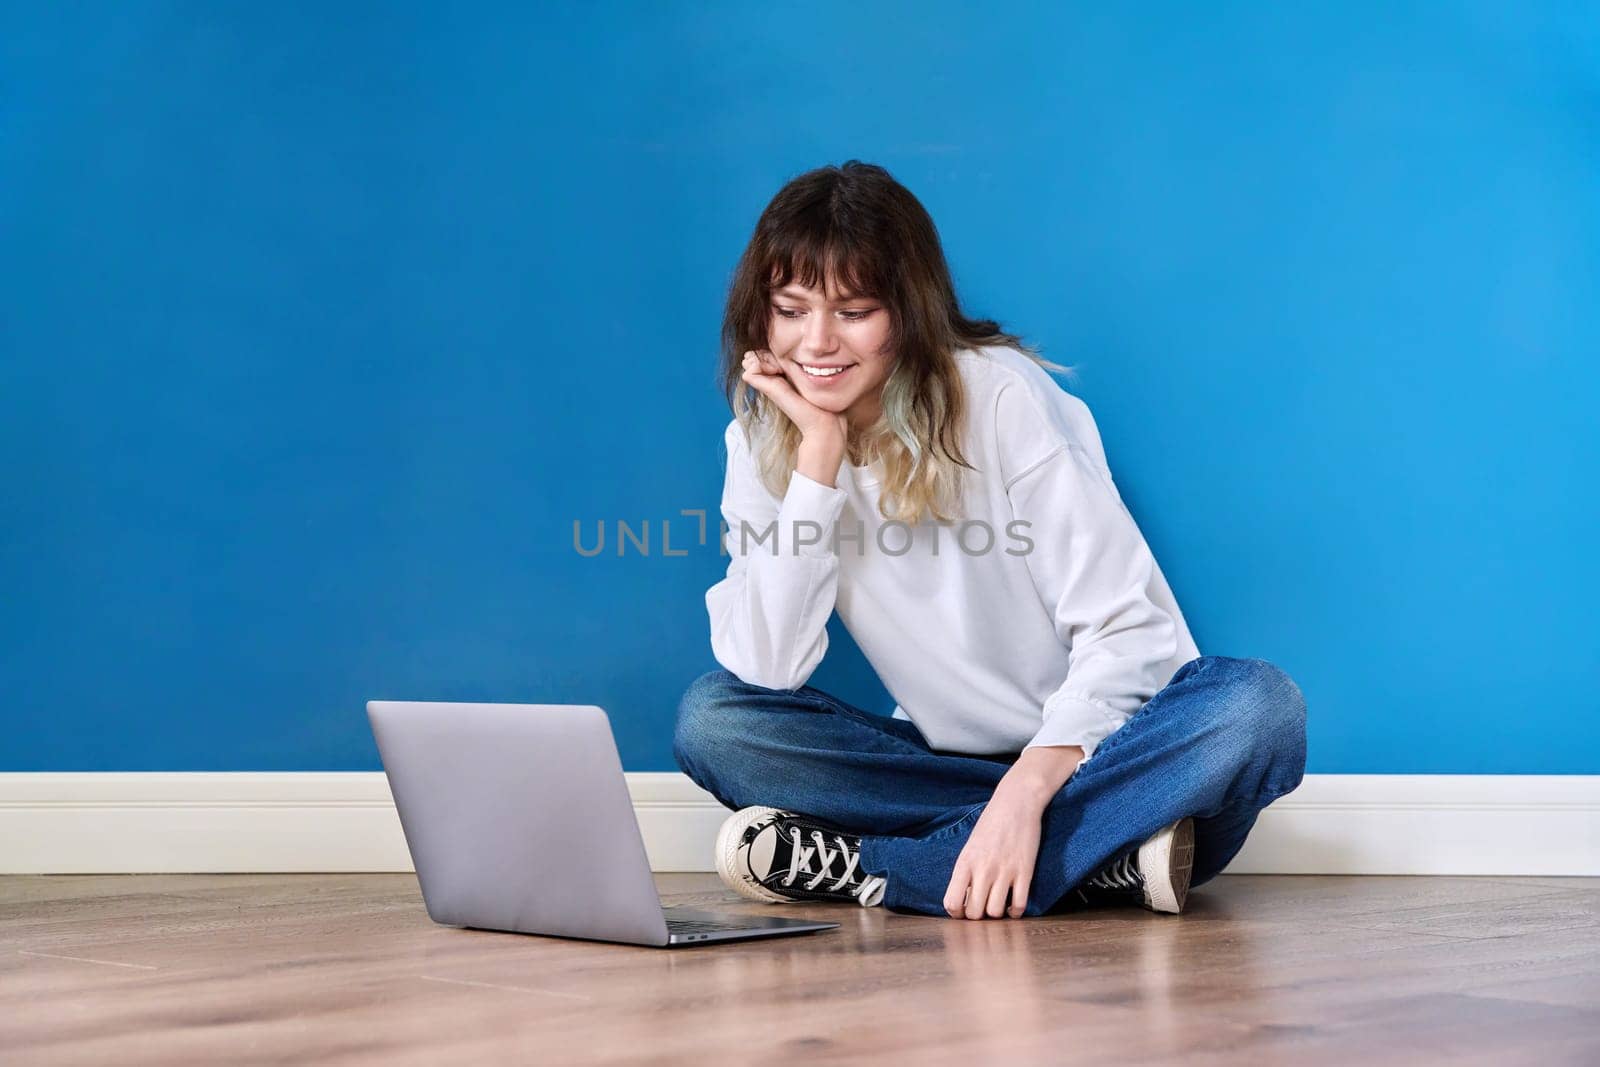 Beautiful teenage female sitting on floor with laptop on blue background. Hipster teenager looking at laptop screen, copy space wall. Youth, lifestyle, leisure, education, technology concept